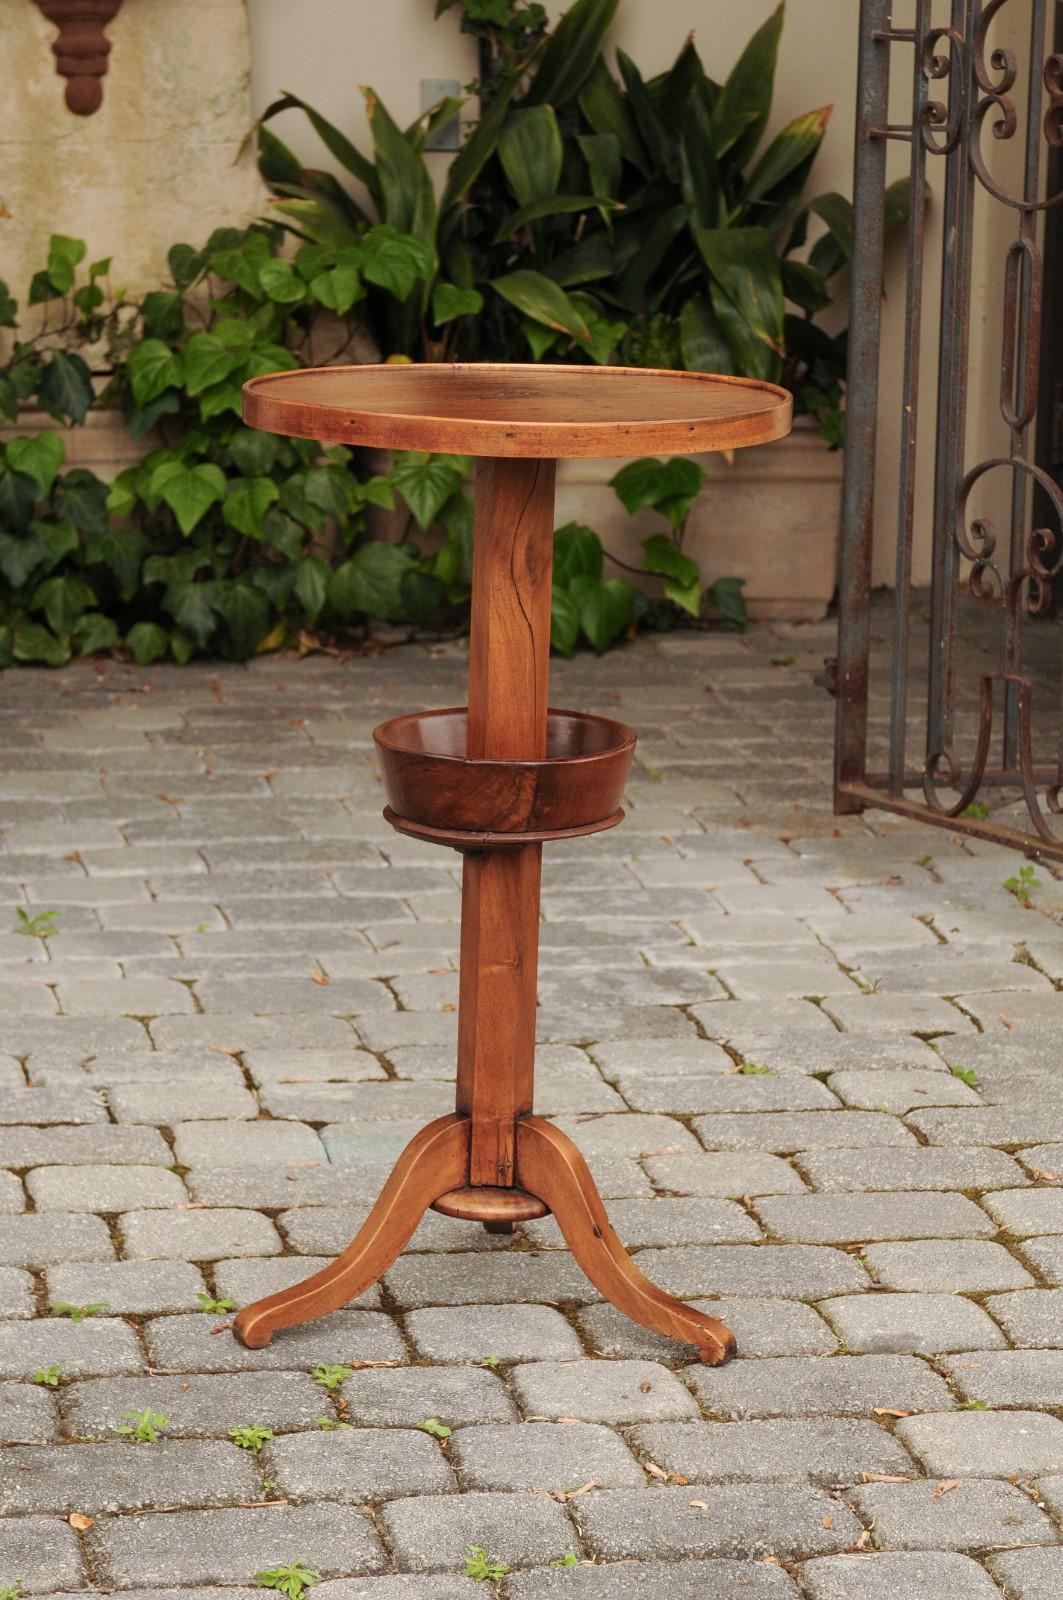 A French walnut guéridon side table from the late 19th century, with circular top and tripod base. Born in France a few years after the collapse of the Second Empire, this exquisite walnut guéridon features a round planked top, resting on an